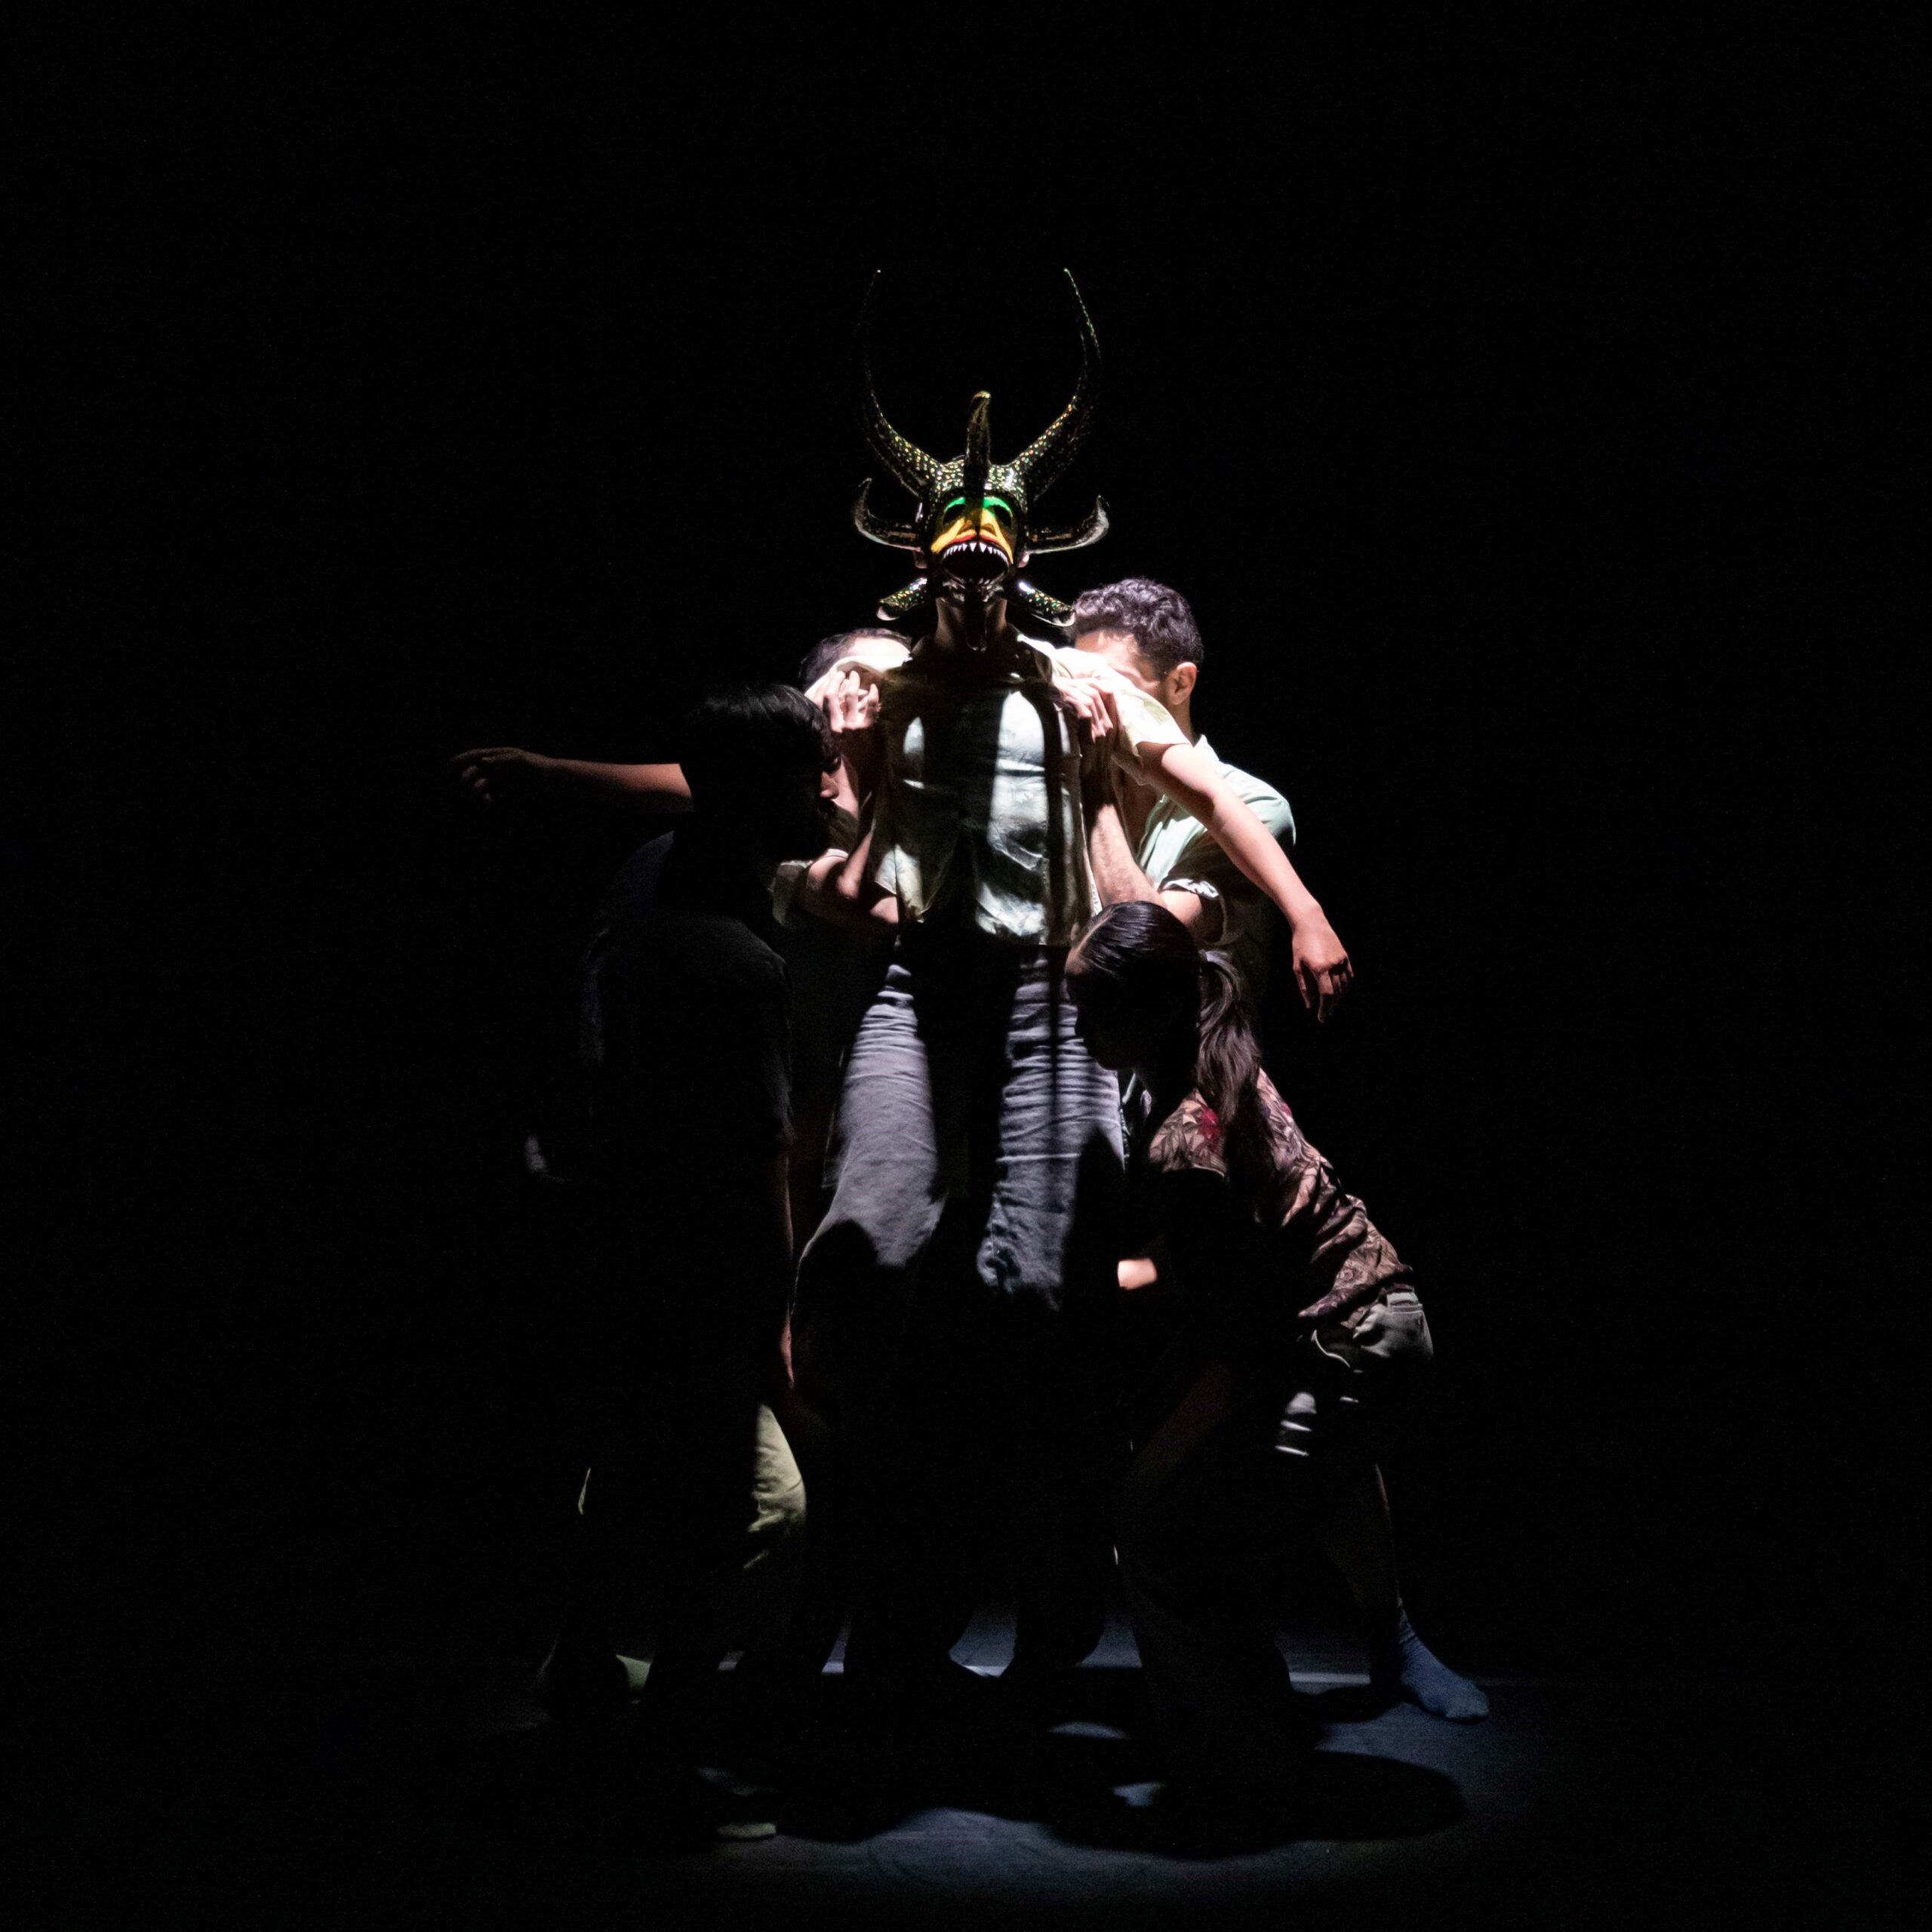 Four dancers stand in a spot light and lift another dancer wearing a big monster-like face mask.